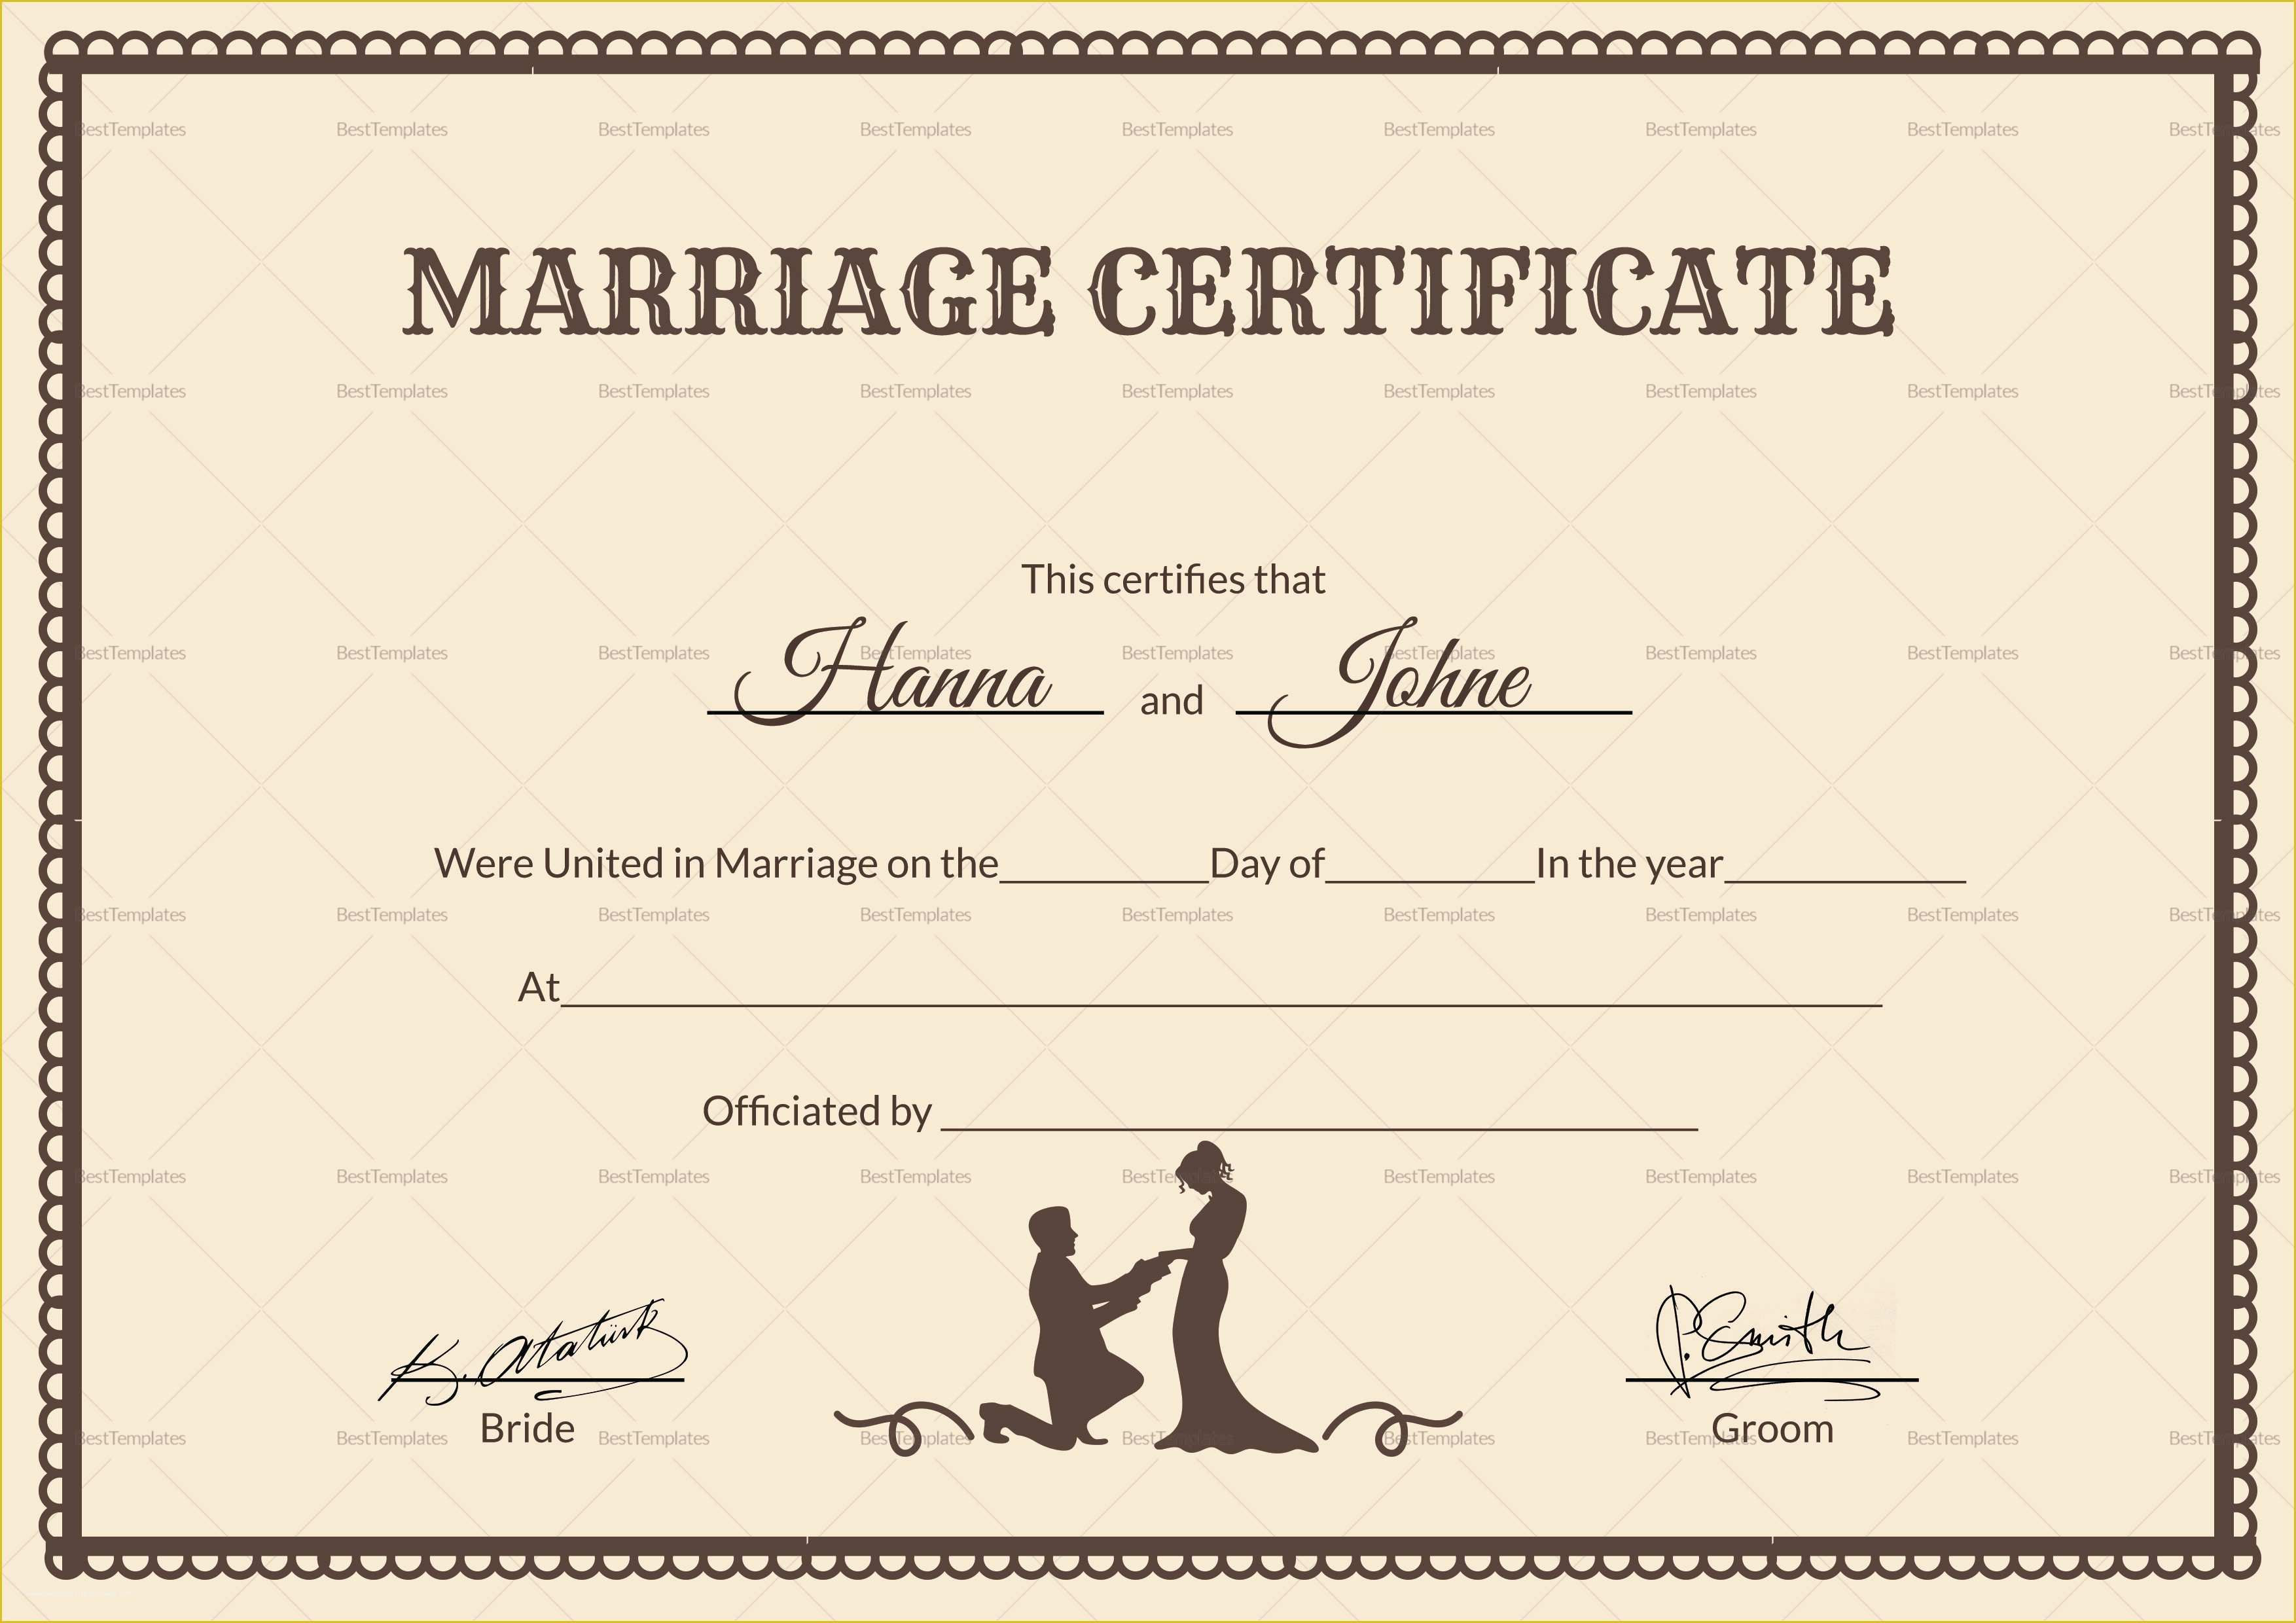 Free Marriage Certificate Template Microsoft Word Of Vintage Marriage Certificate Design Template In Psd Word